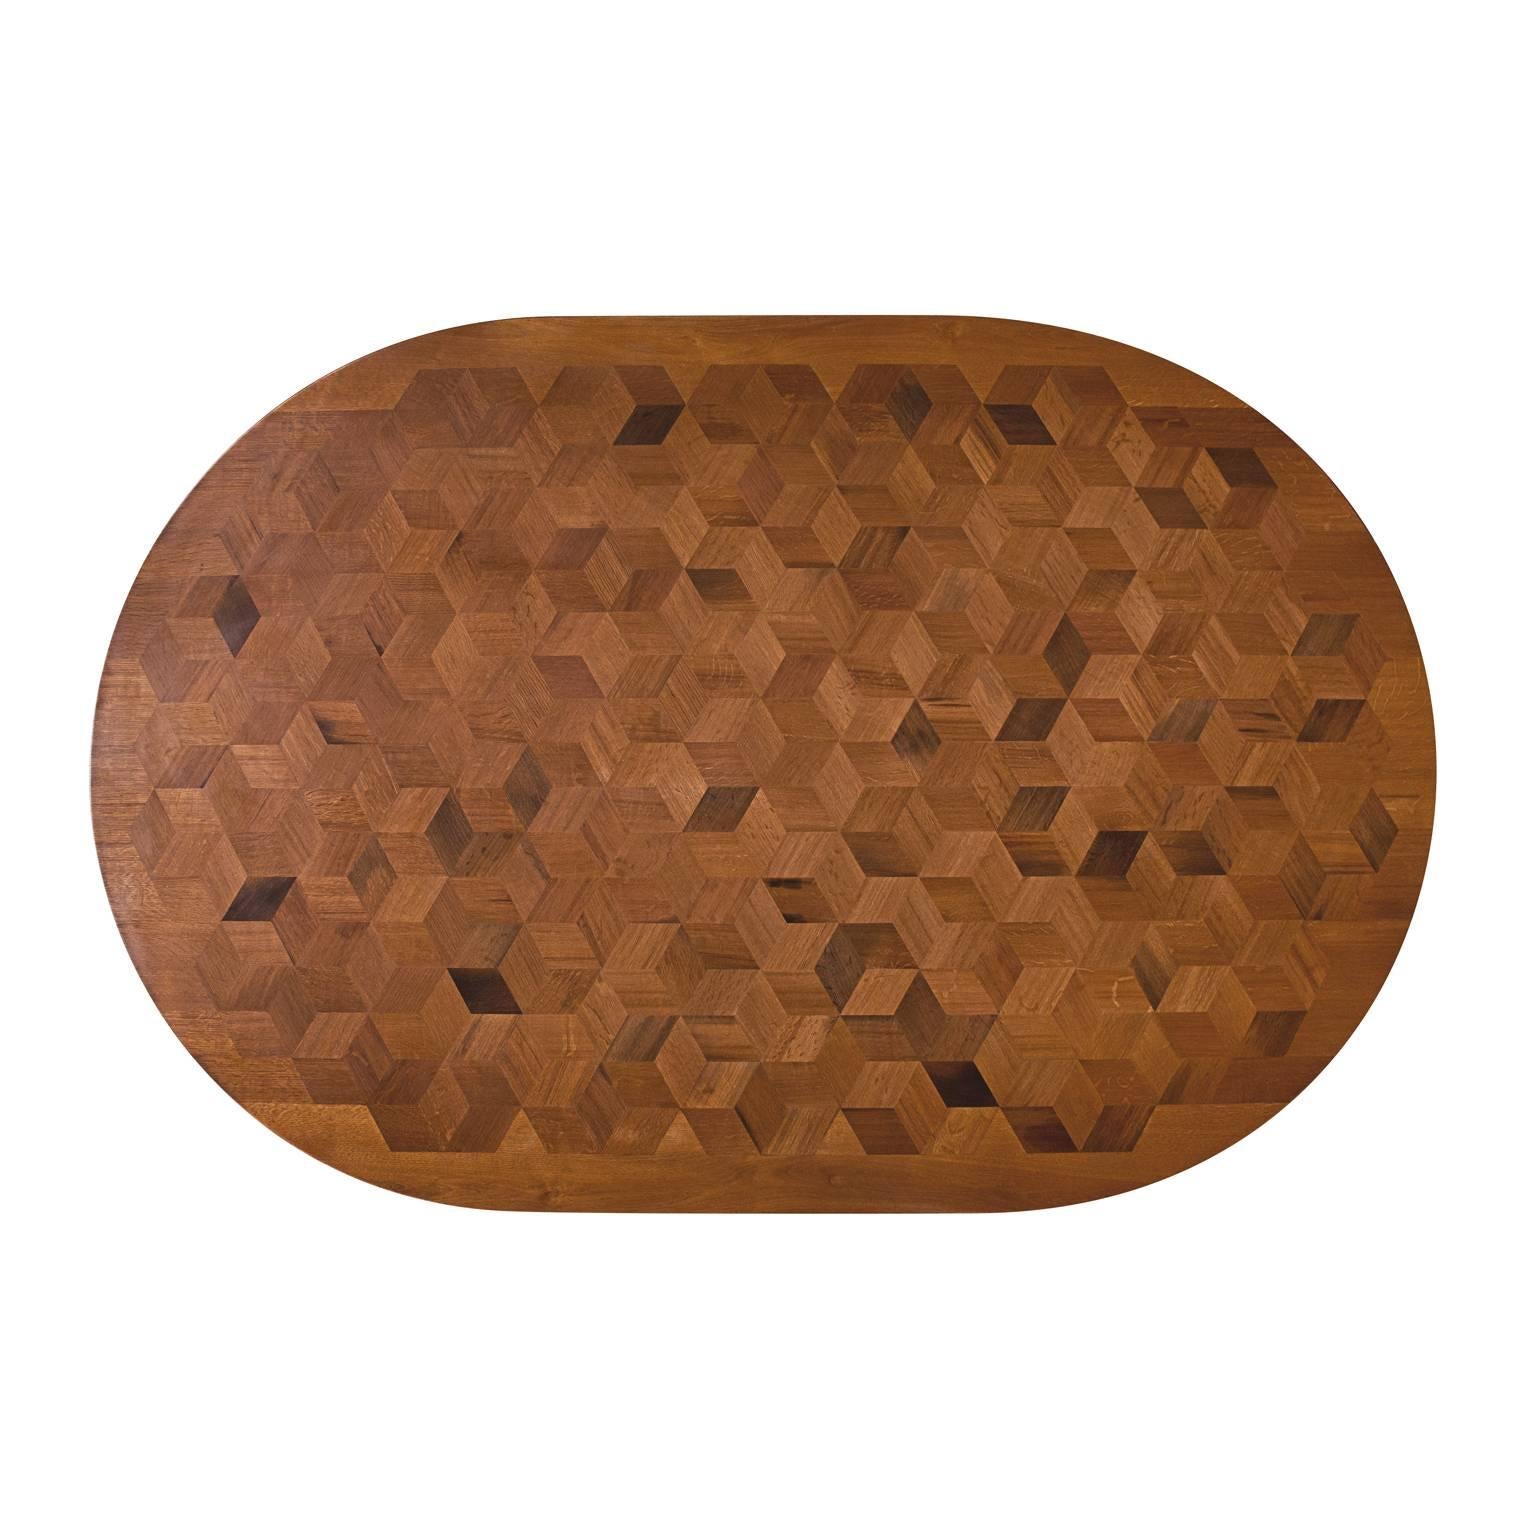 Inspired by the work of Escher, with Maurits we want to prove that a table doesn’t have to be antique to be an impressive testimony of craftsmanship. The marquetry table top in reclaimed Oak contains 381 rhombi cut from old Italian wine barrels. The